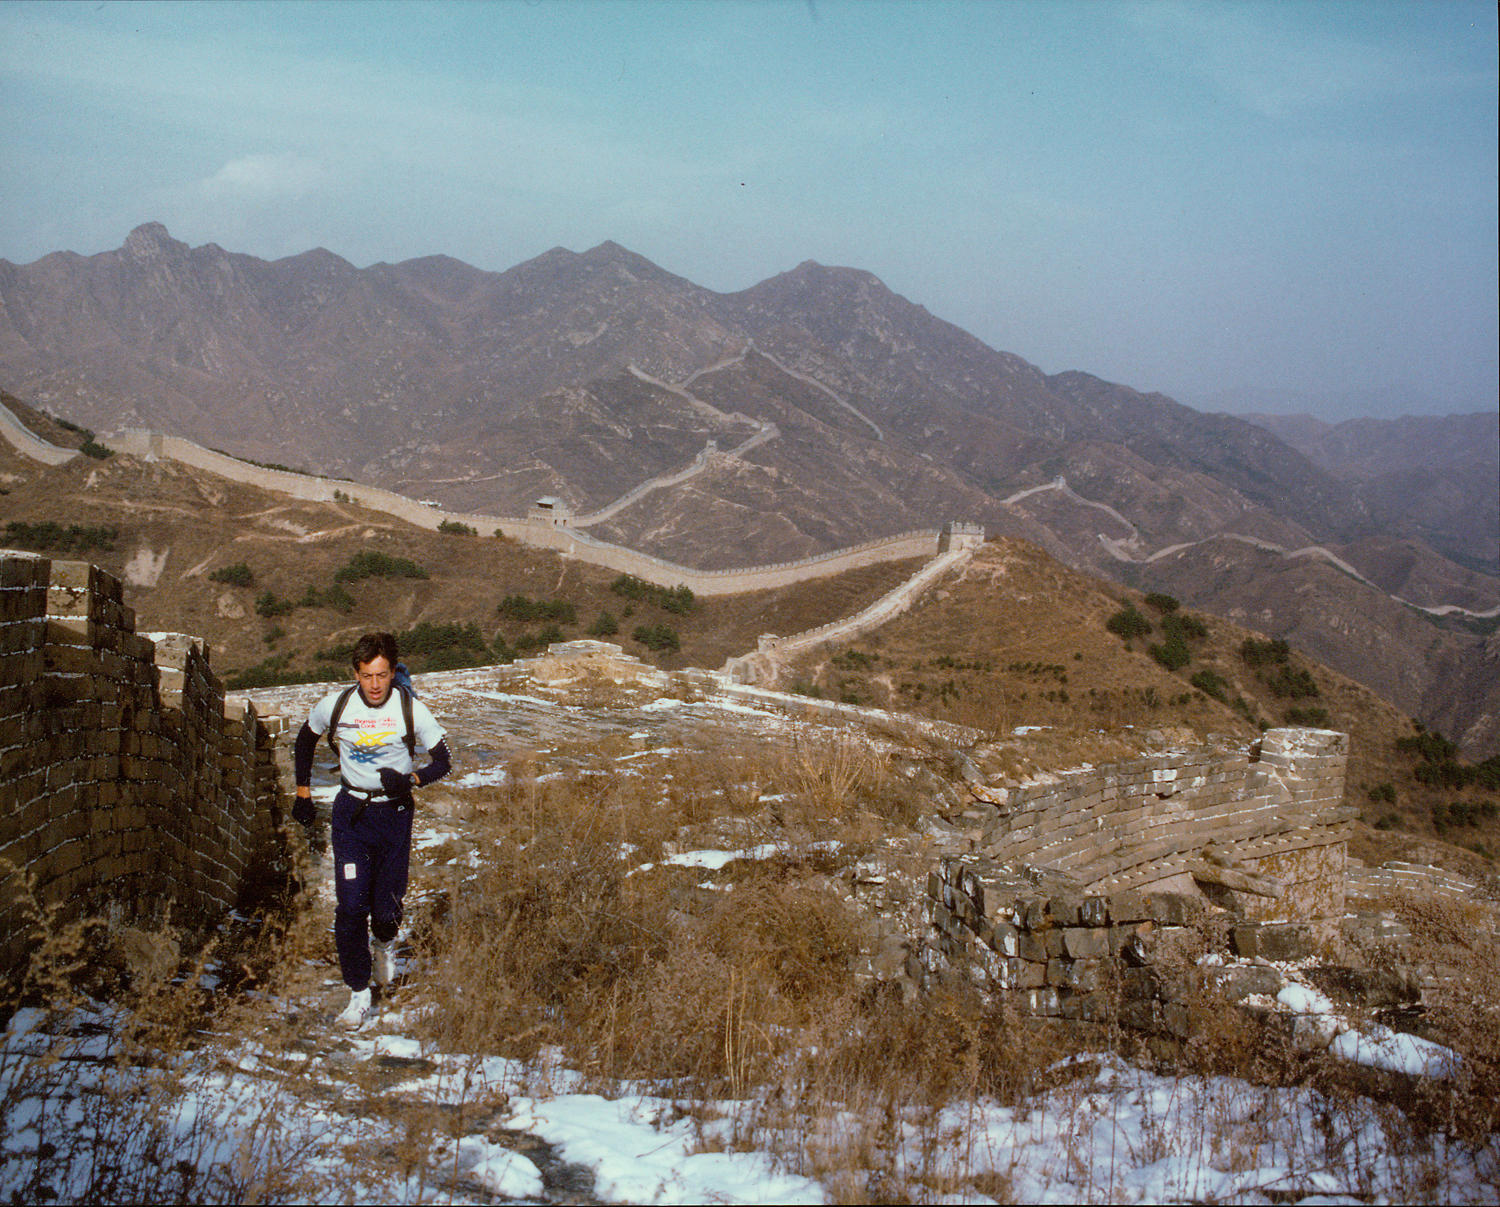 William Lindesay on his epic Great Wall journey 25 years ago.